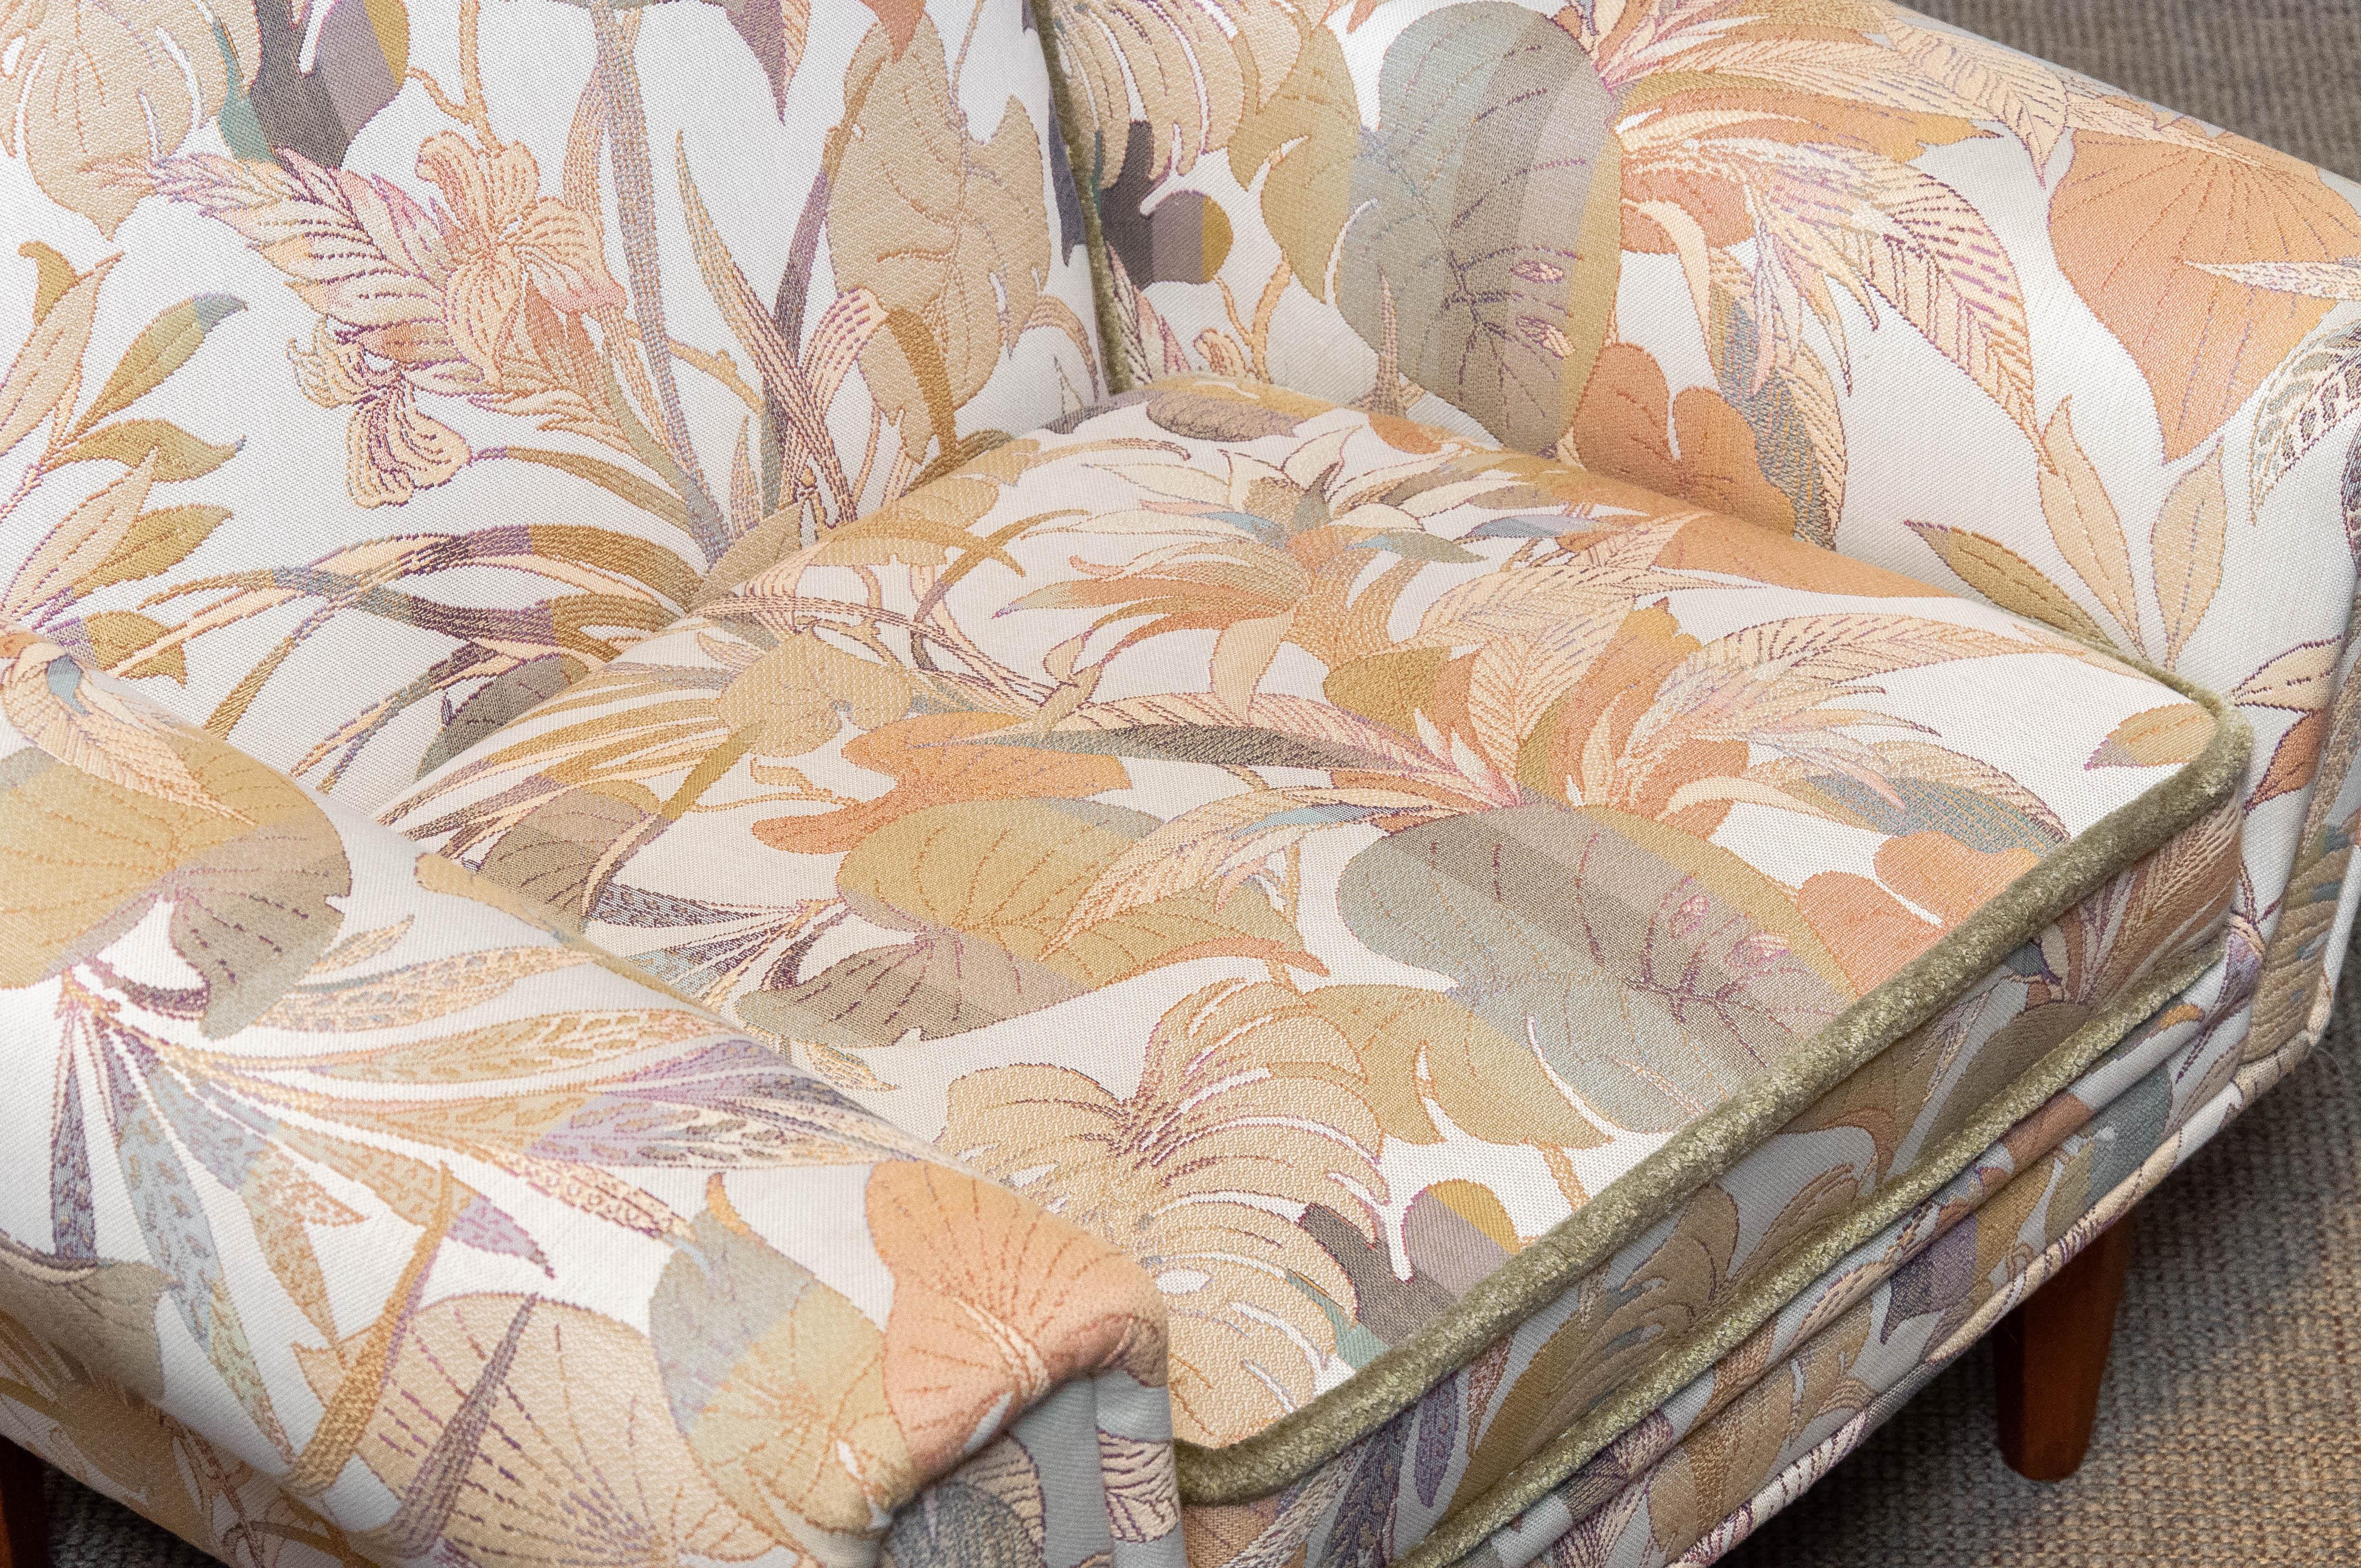 Danish Low Back Lounge Chair Upholstered Floral Jacquard Fabric from the 1970's For Sale 6